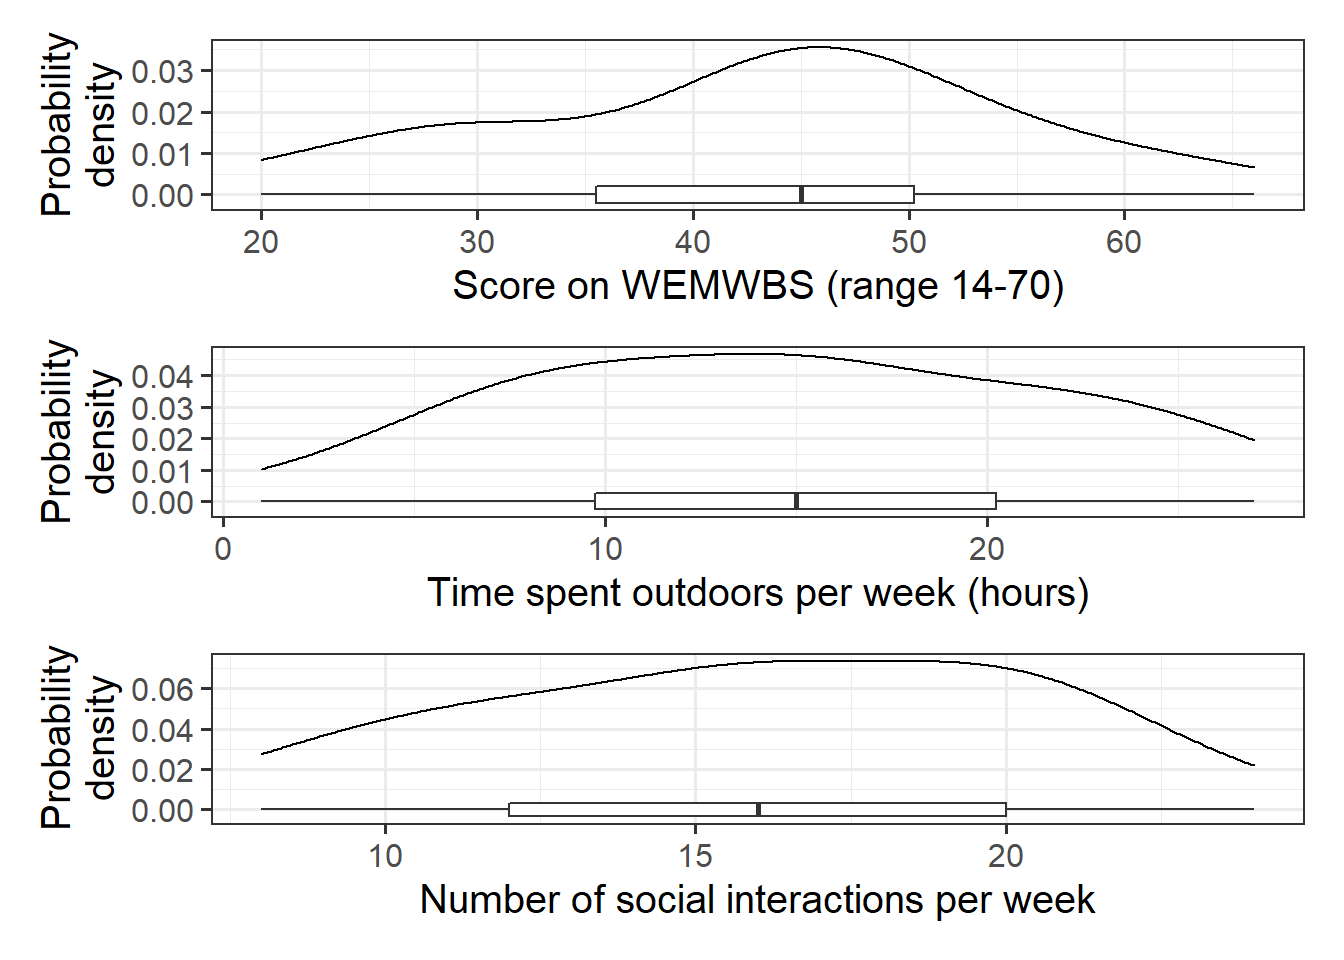 Marginal distribution plots of wellbeing sores, weekly hours spent outdoors, and social interactions